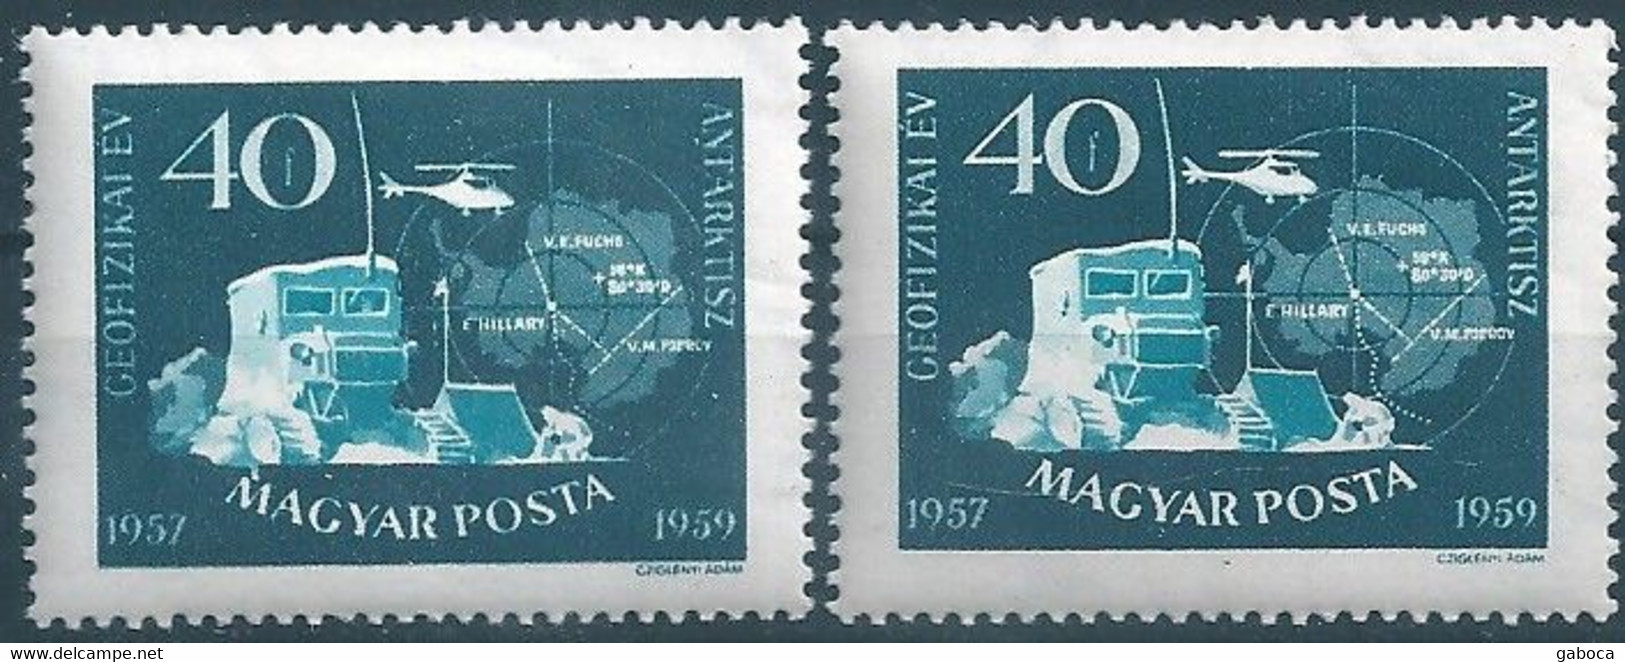 C1074 Hungary Transport Polar Station Snowtruck Helicopter MNH ERROR - Other Means Of Transport